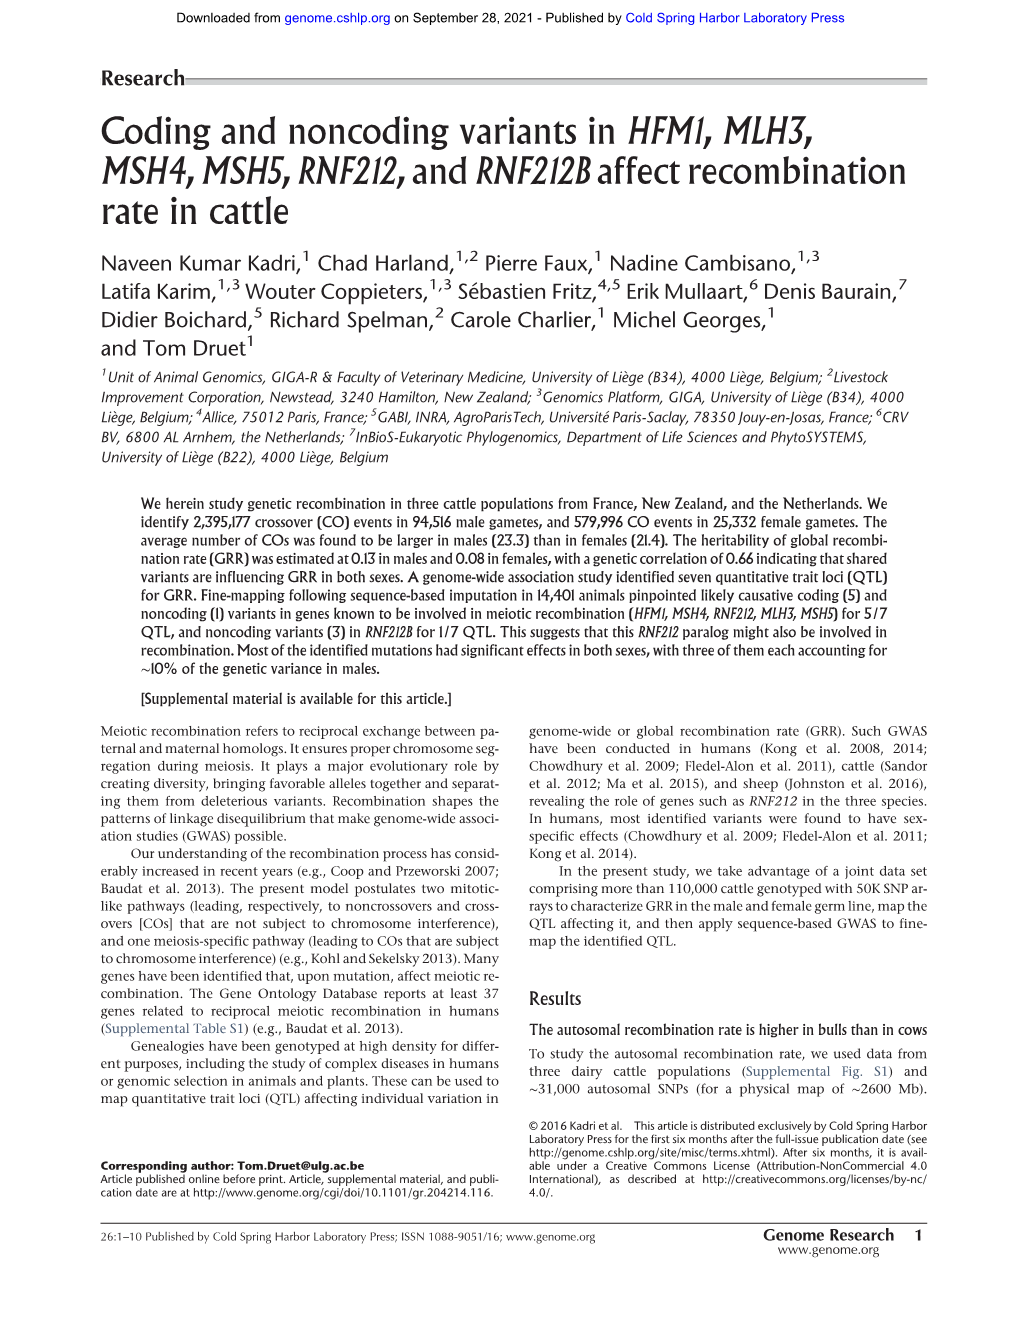 HFM1, MLH3, MSH4, MSH5, RNF212, and RNF212B Affect Recombination Rate in Cattle